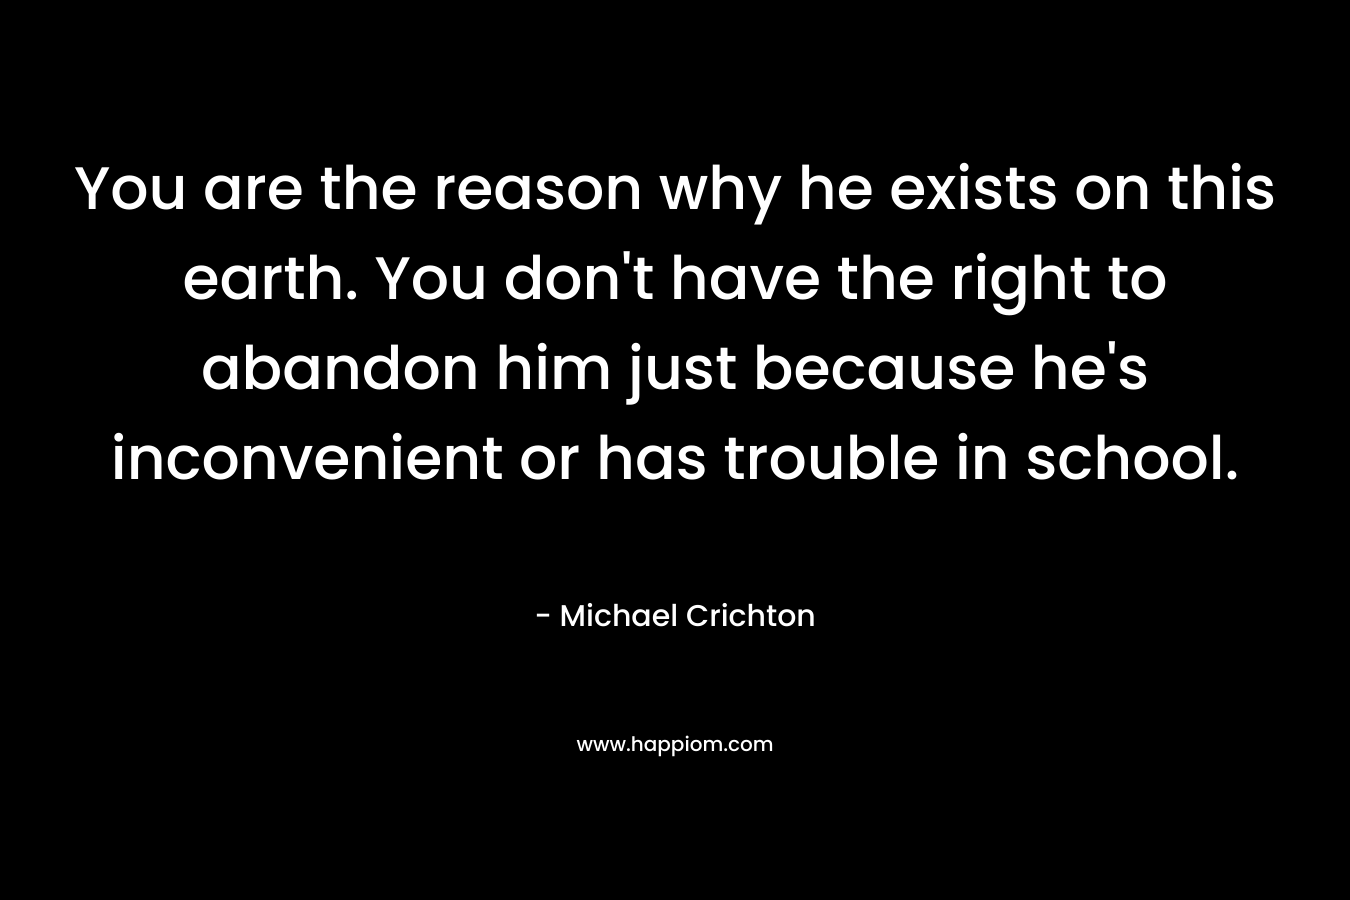 You are the reason why he exists on this earth. You don’t have the right to abandon him just because he’s inconvenient or has trouble in school. – Michael Crichton